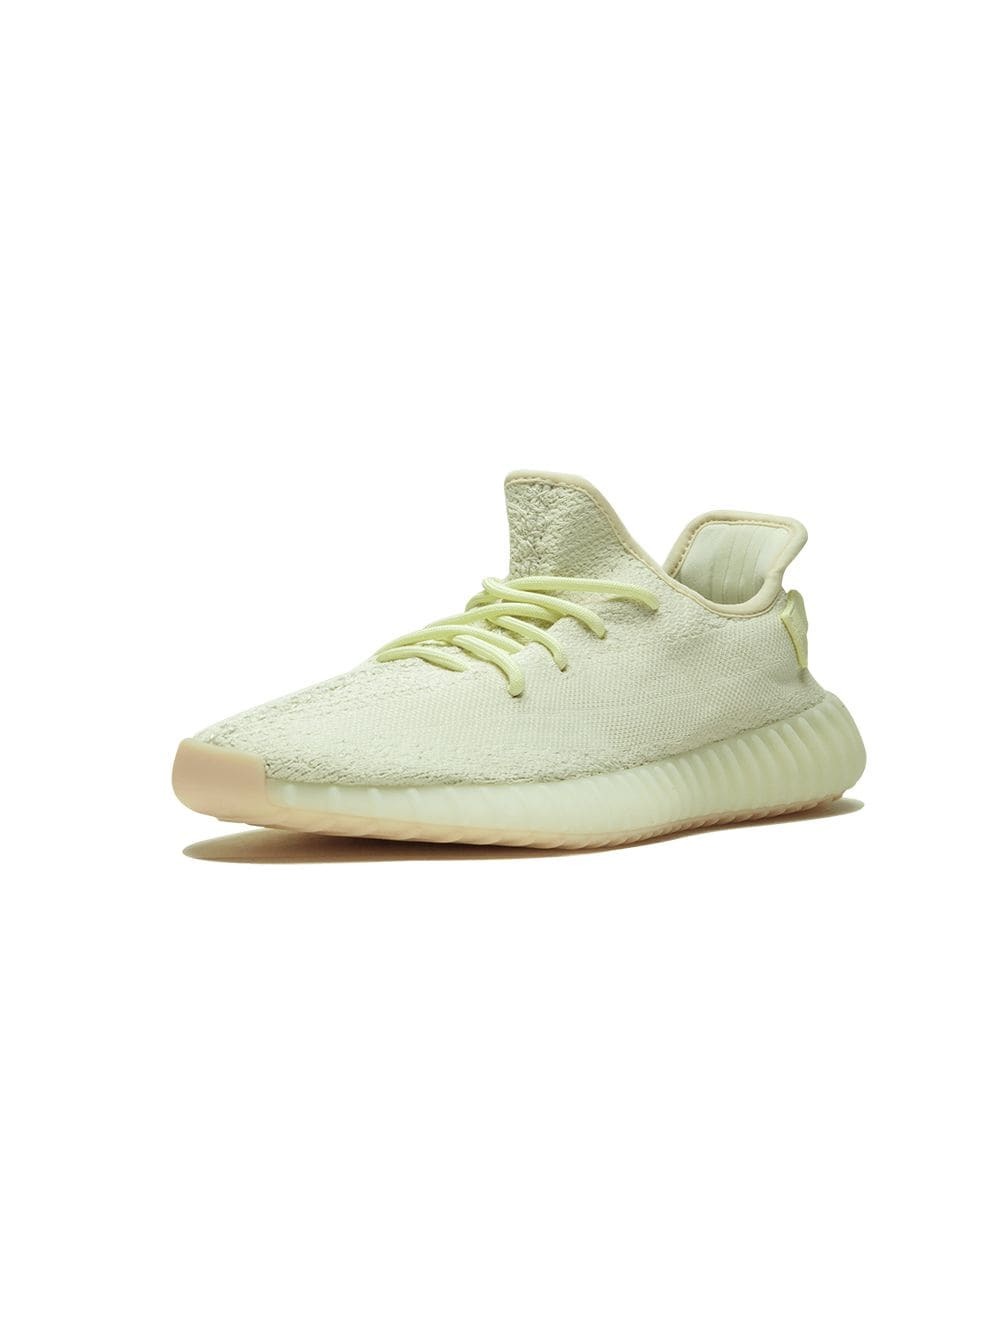 Yeezy Adidas X Boost 350 V2 Sneakers 